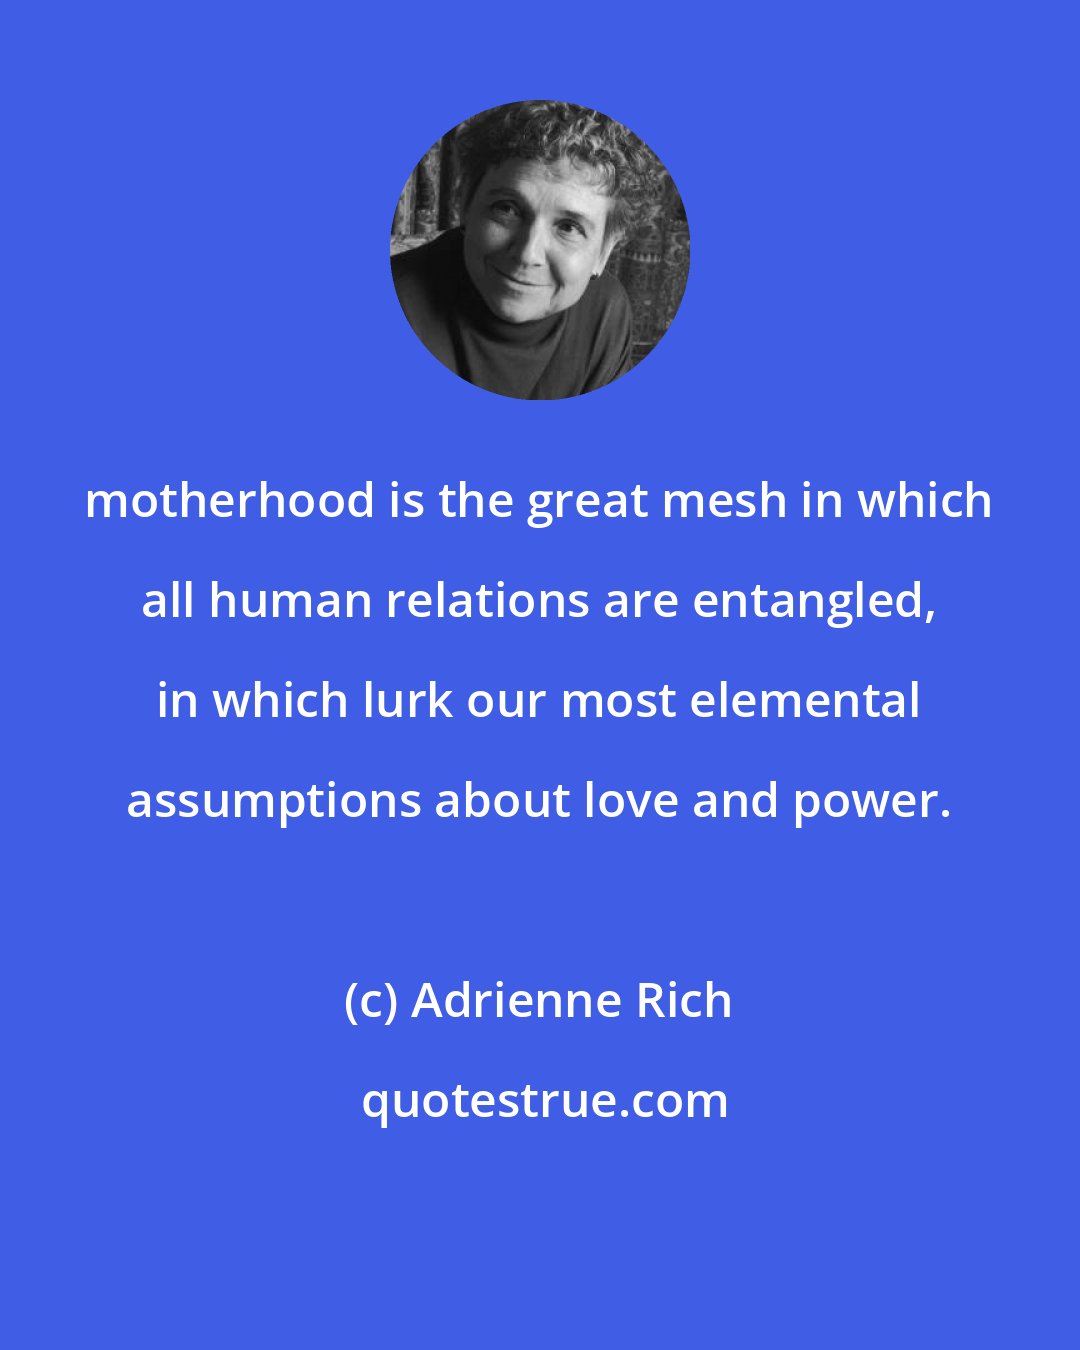 Adrienne Rich: motherhood is the great mesh in which all human relations are entangled, in which lurk our most elemental assumptions about love and power.